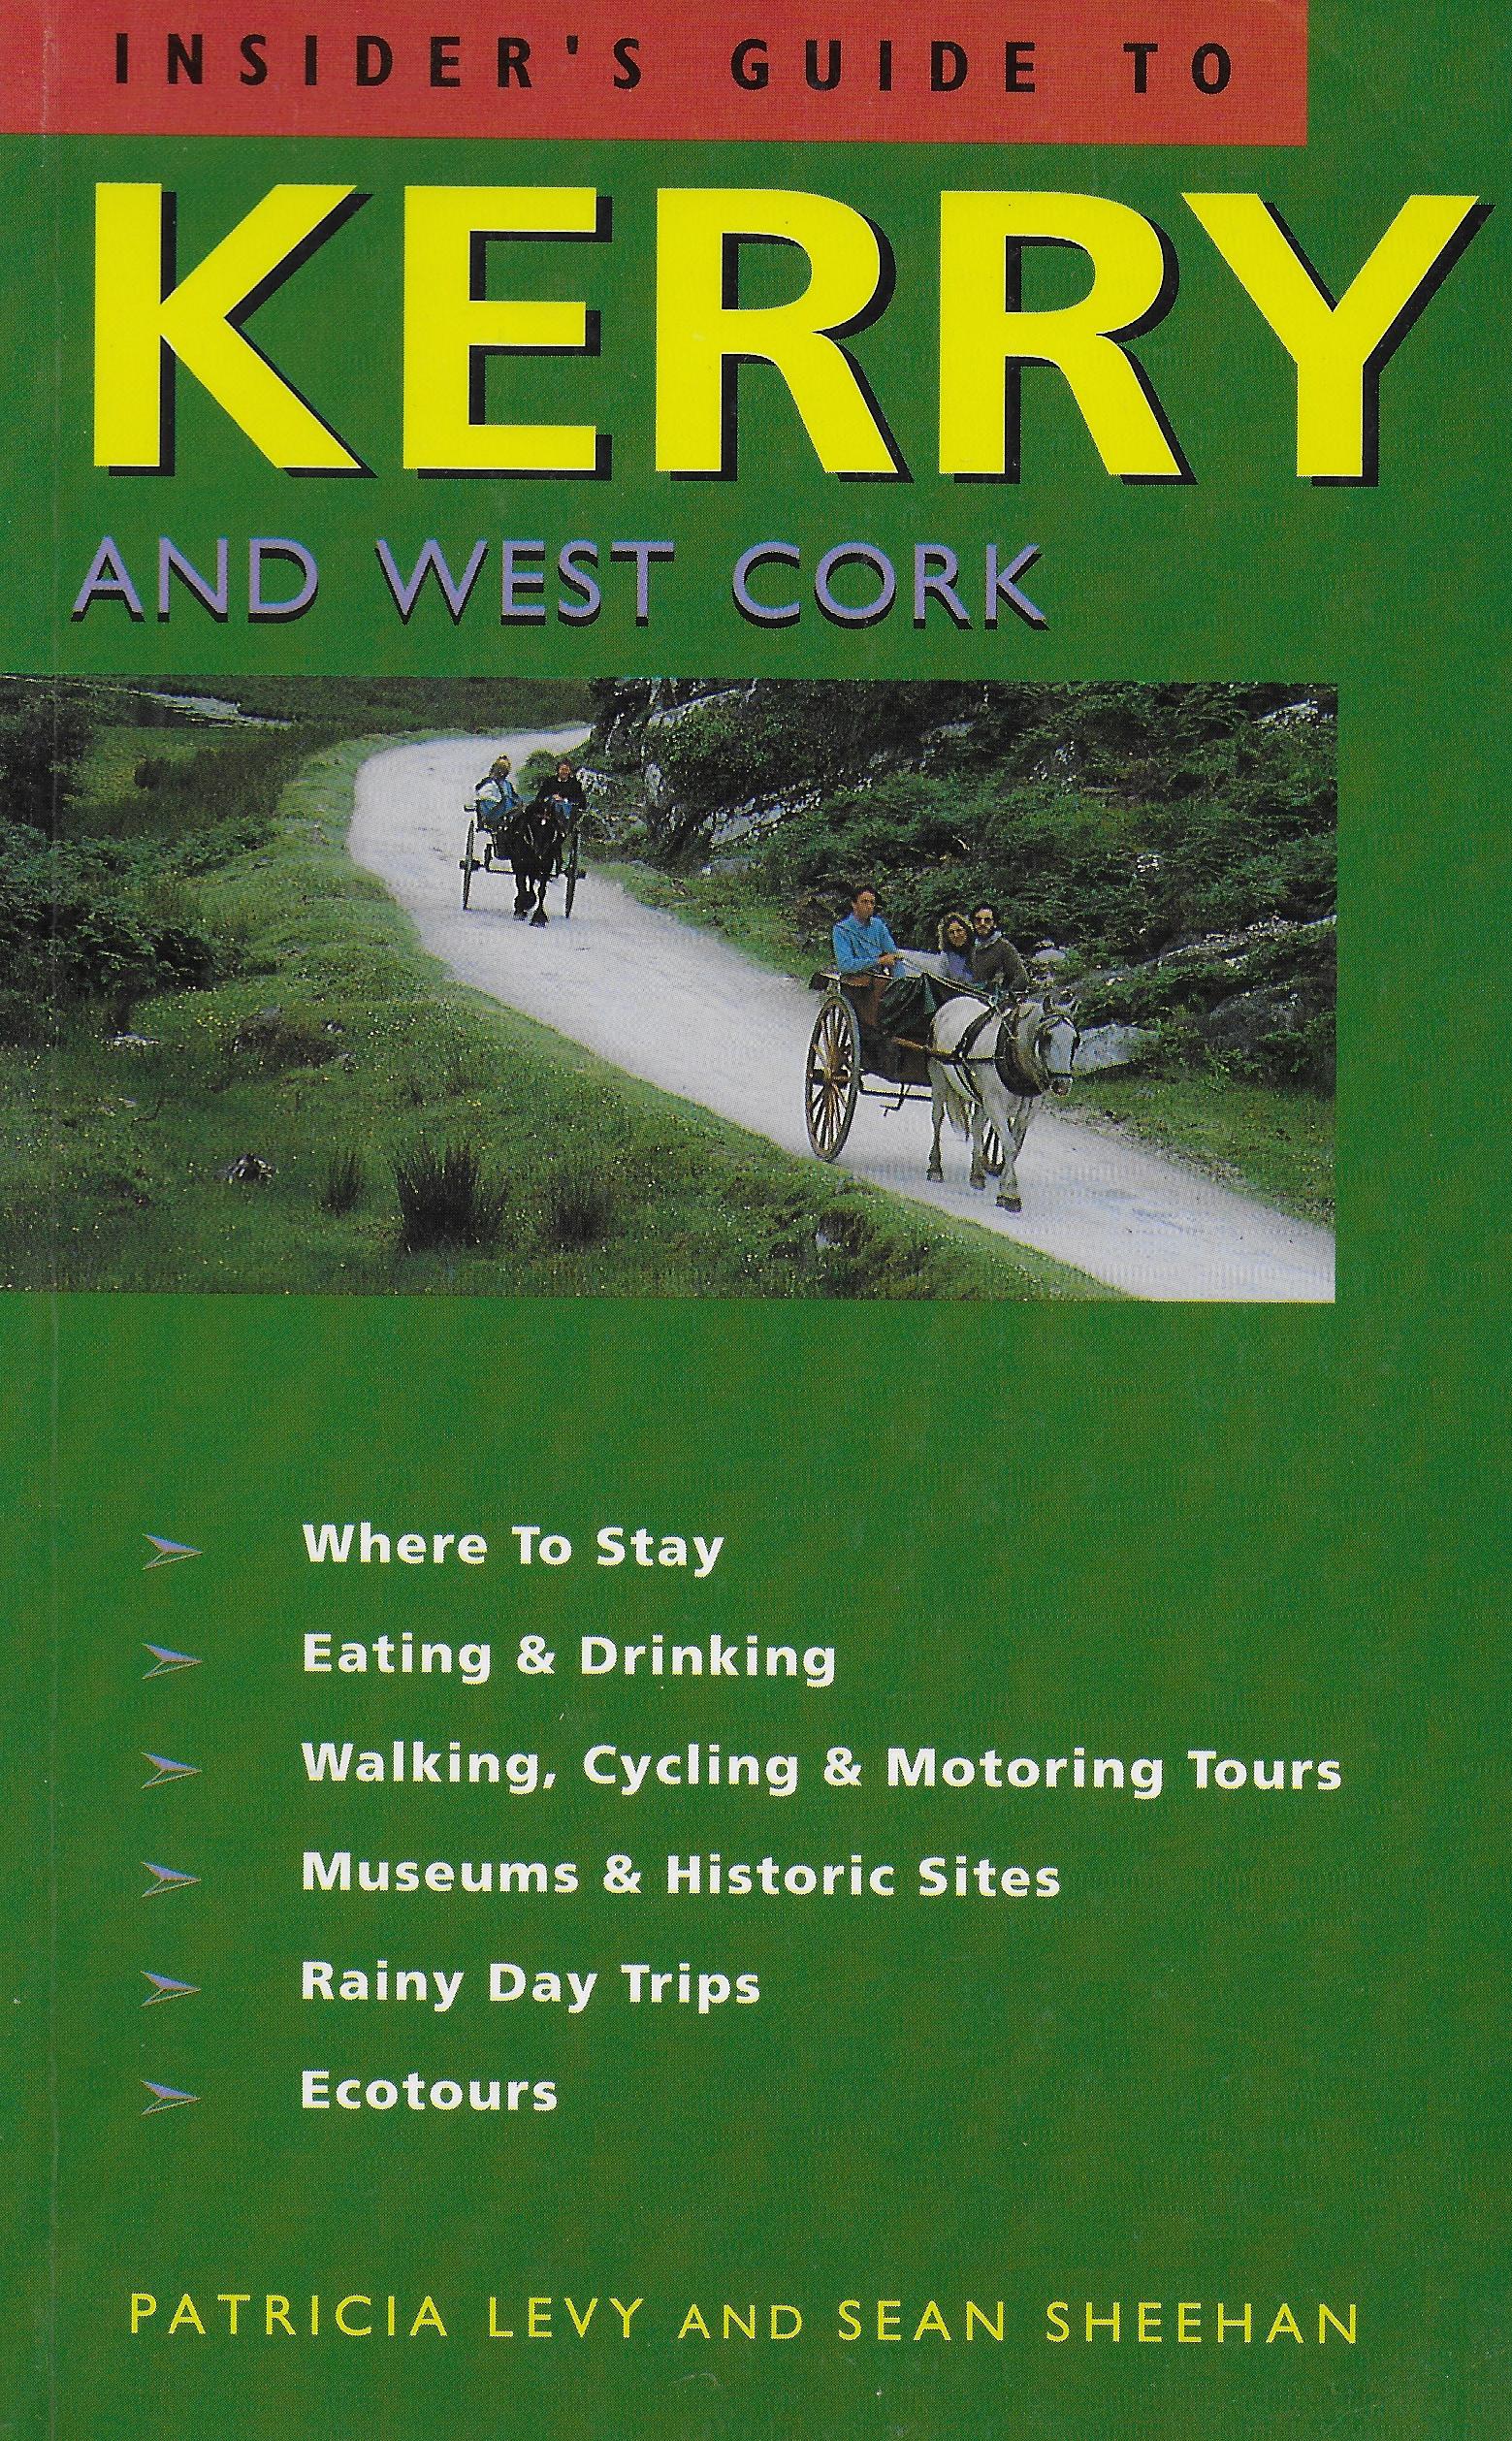 Insider's Guide To Kerry And West Cork (1995)